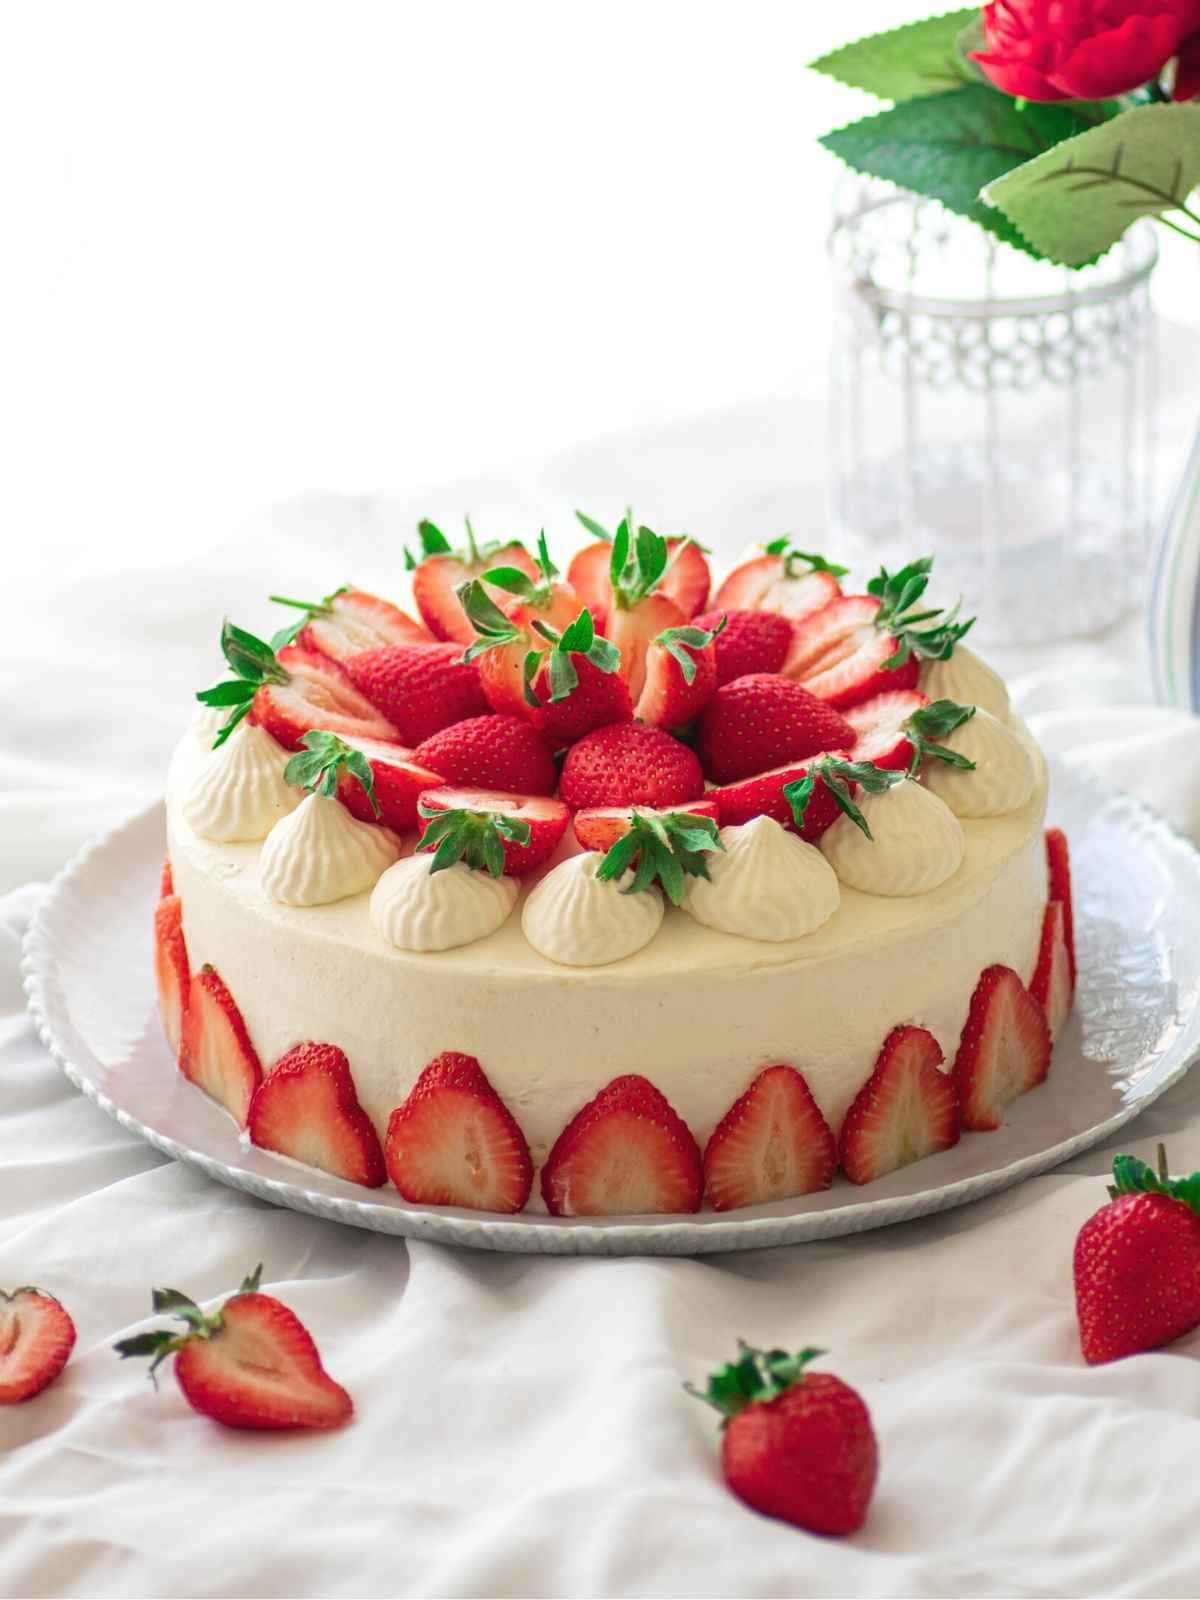 Flavored Japanese Cake Strawberries Background